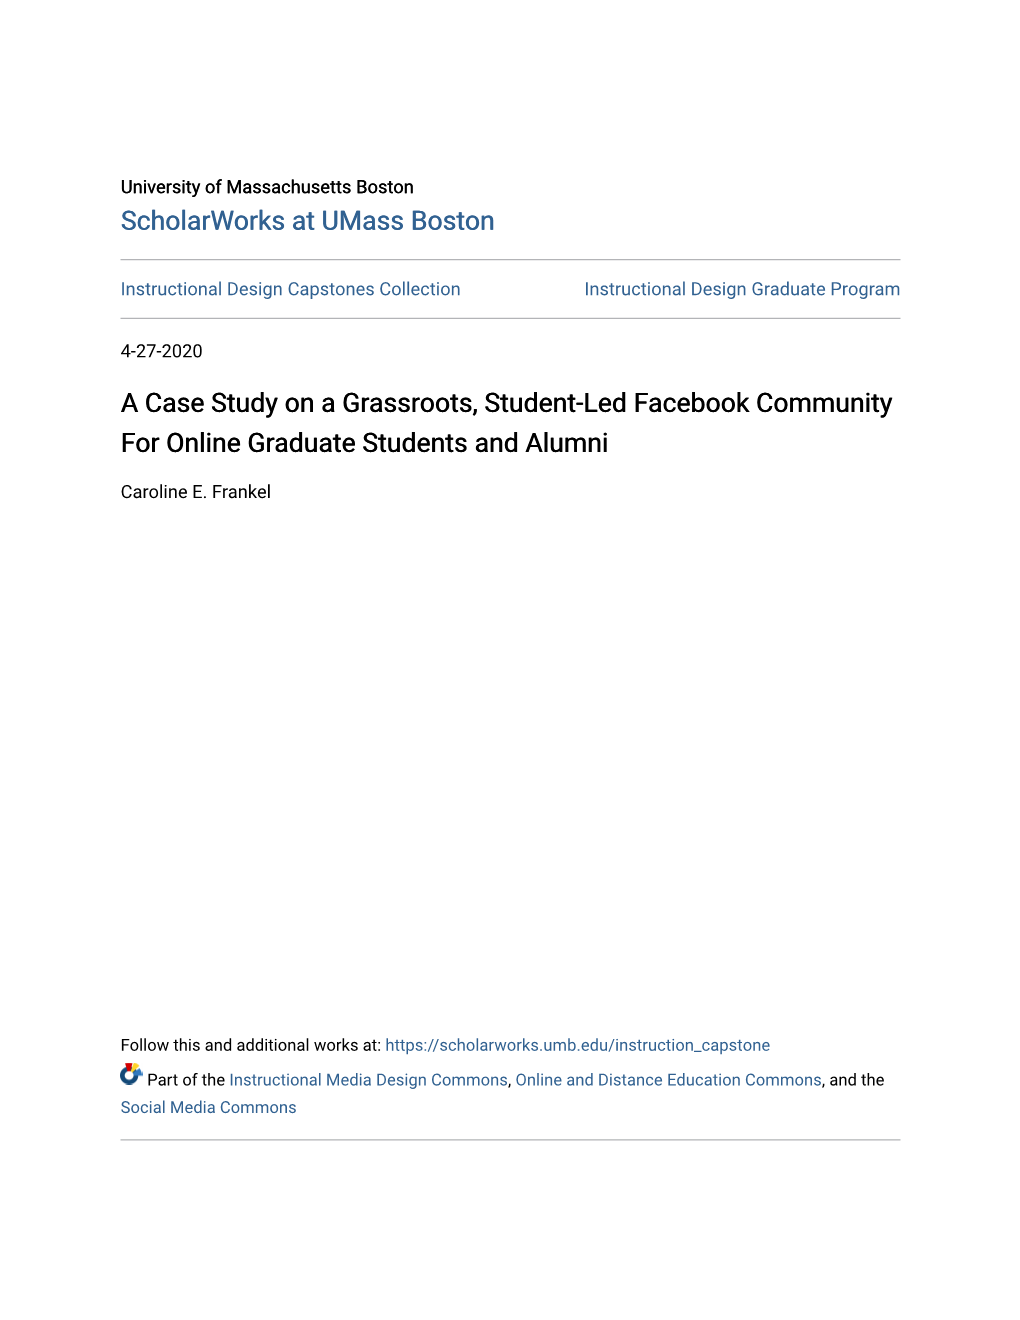 A Case Study on a Grassroots, Student-Led Facebook Community for Online Graduate Students and Alumni